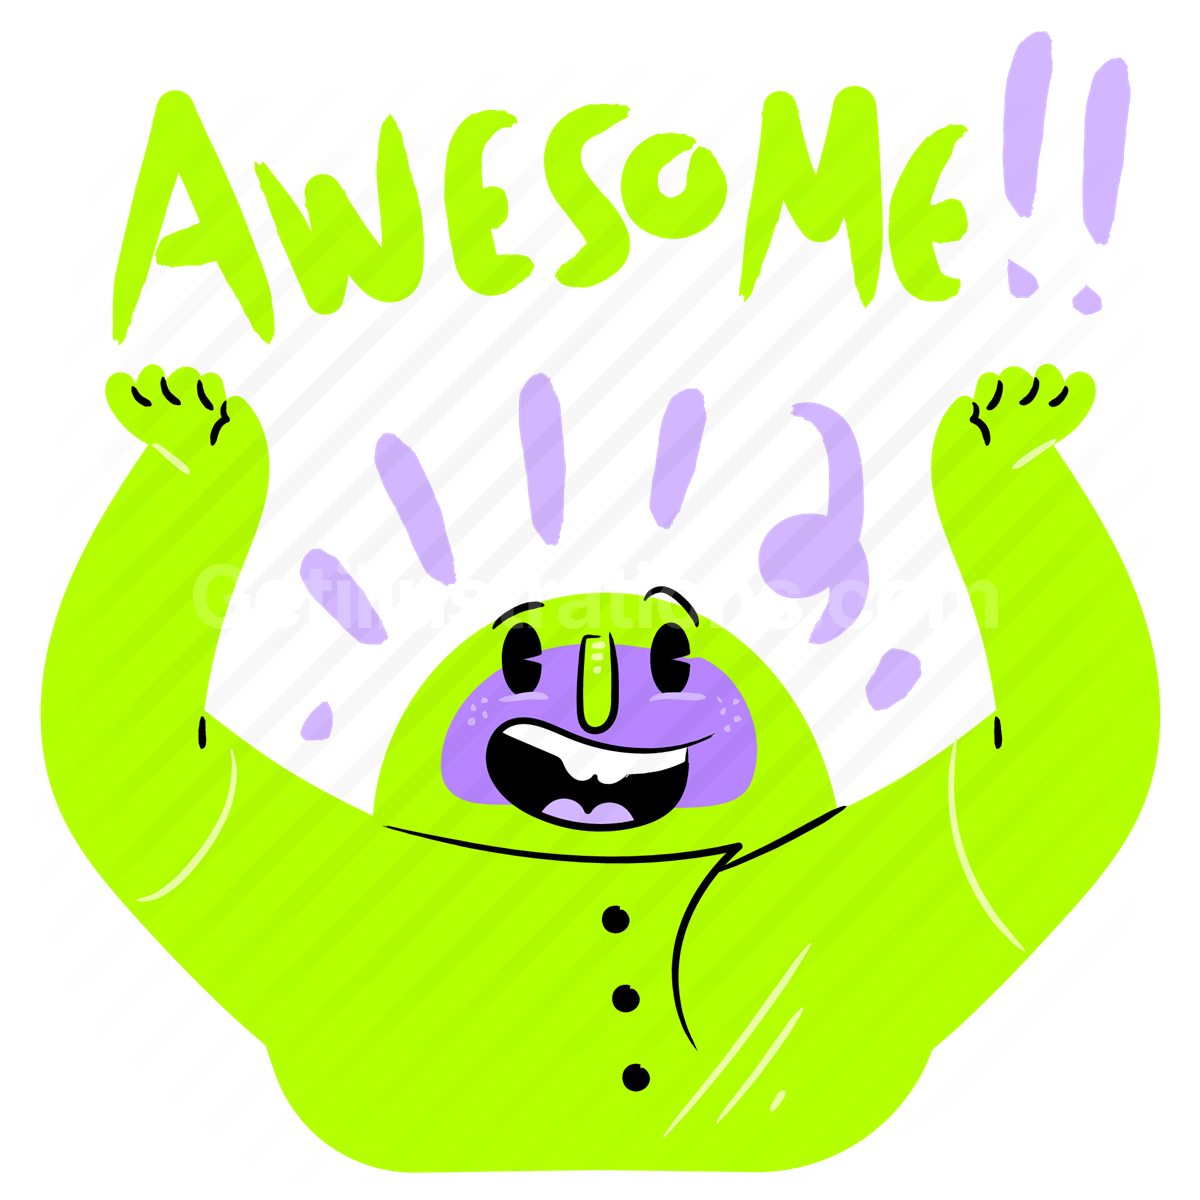 awesome, happy, celebration, sticker, face, smiley, character